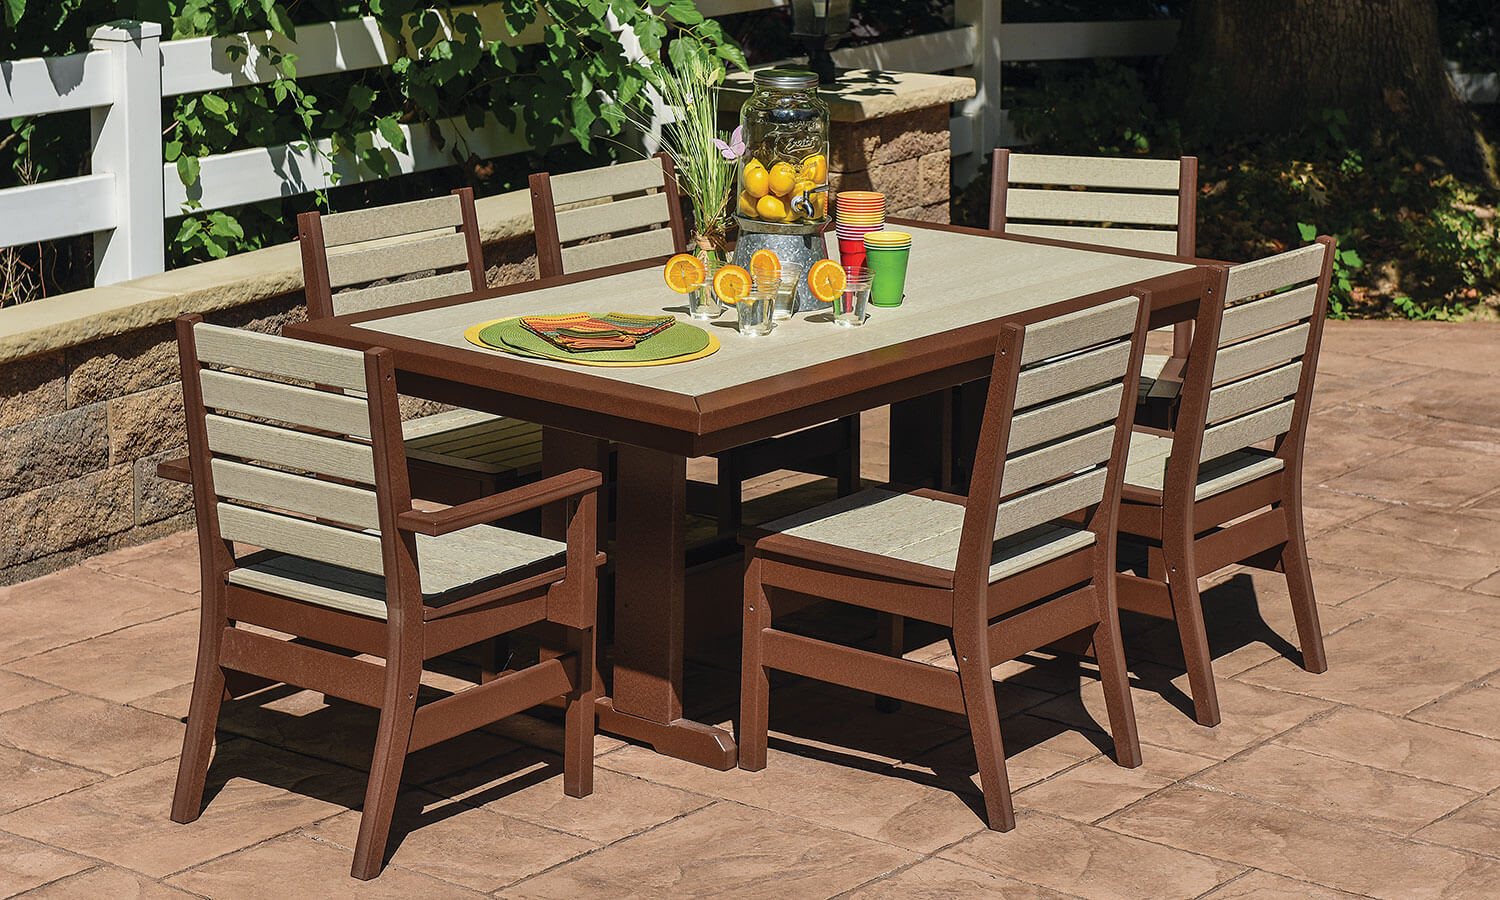 EC Woods St. Croix Outdoor Poly Dining Height Furniture Set